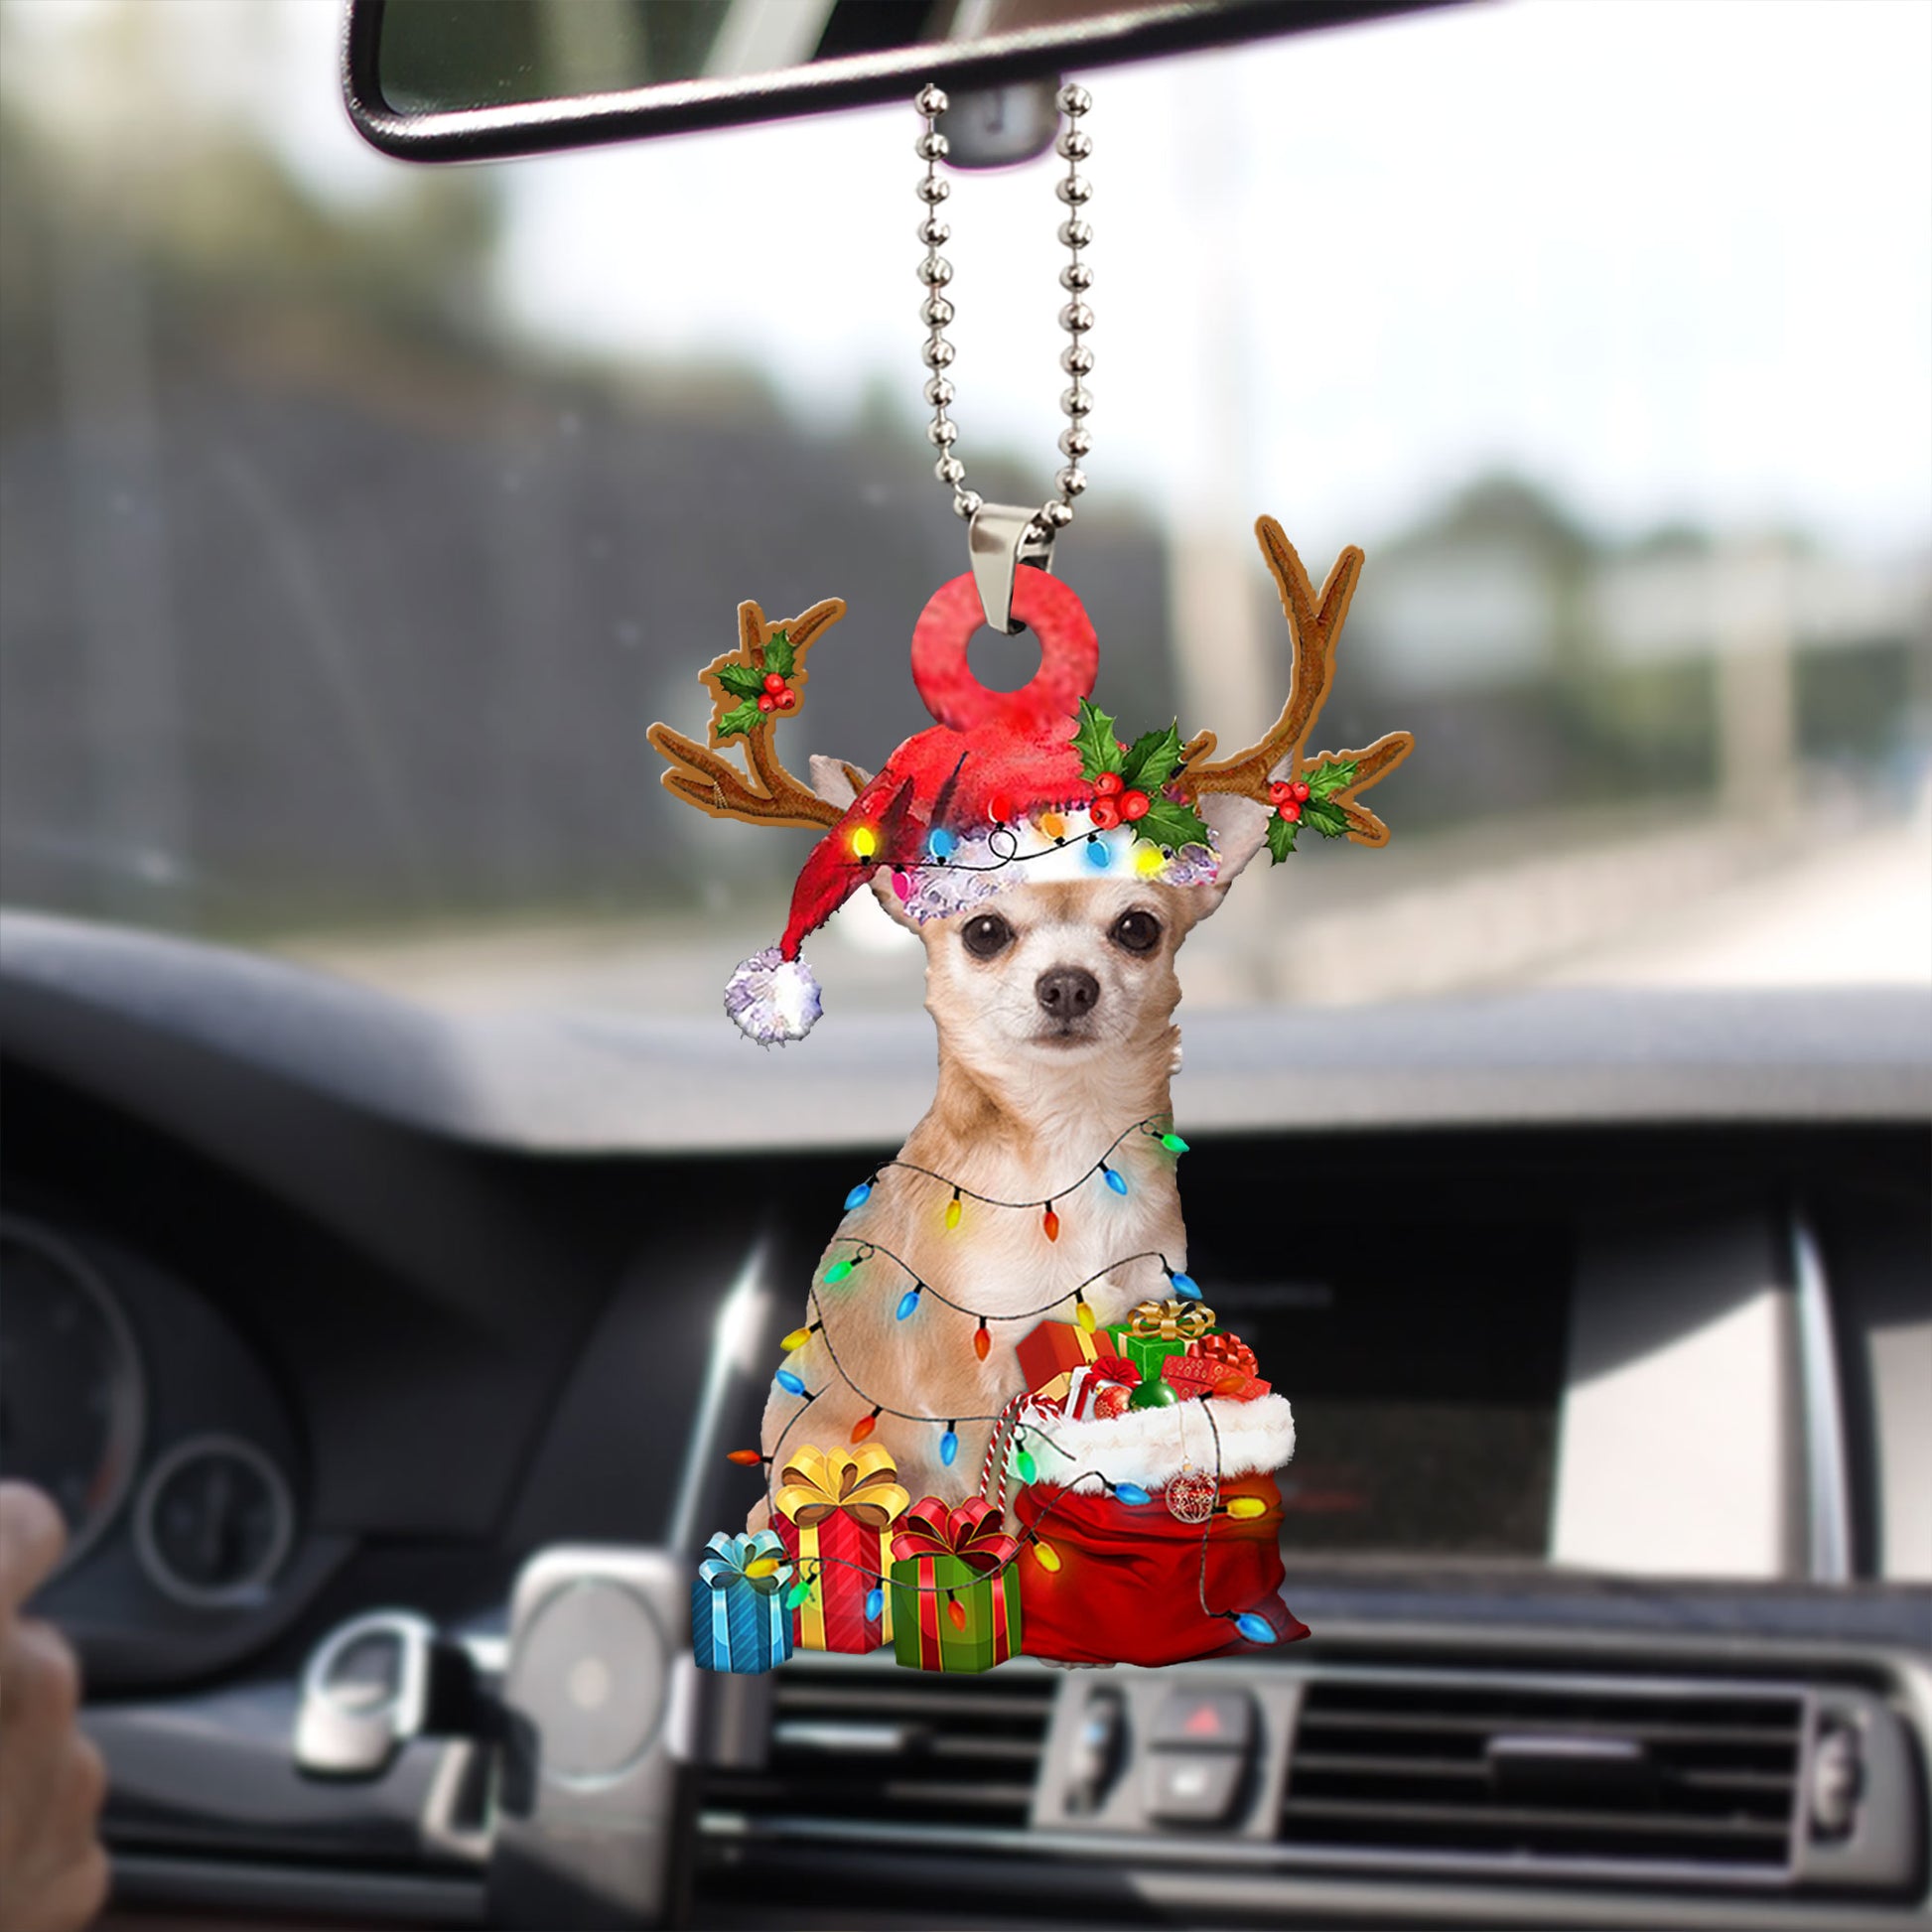 Ohaprints-Christmas-Ornament-2D-Flat-Chihuahua-Wearing-Reindeer-With-String-Light-Gift-For-Dog-Lovers-Xmas-Tree-Decor-Gift-187